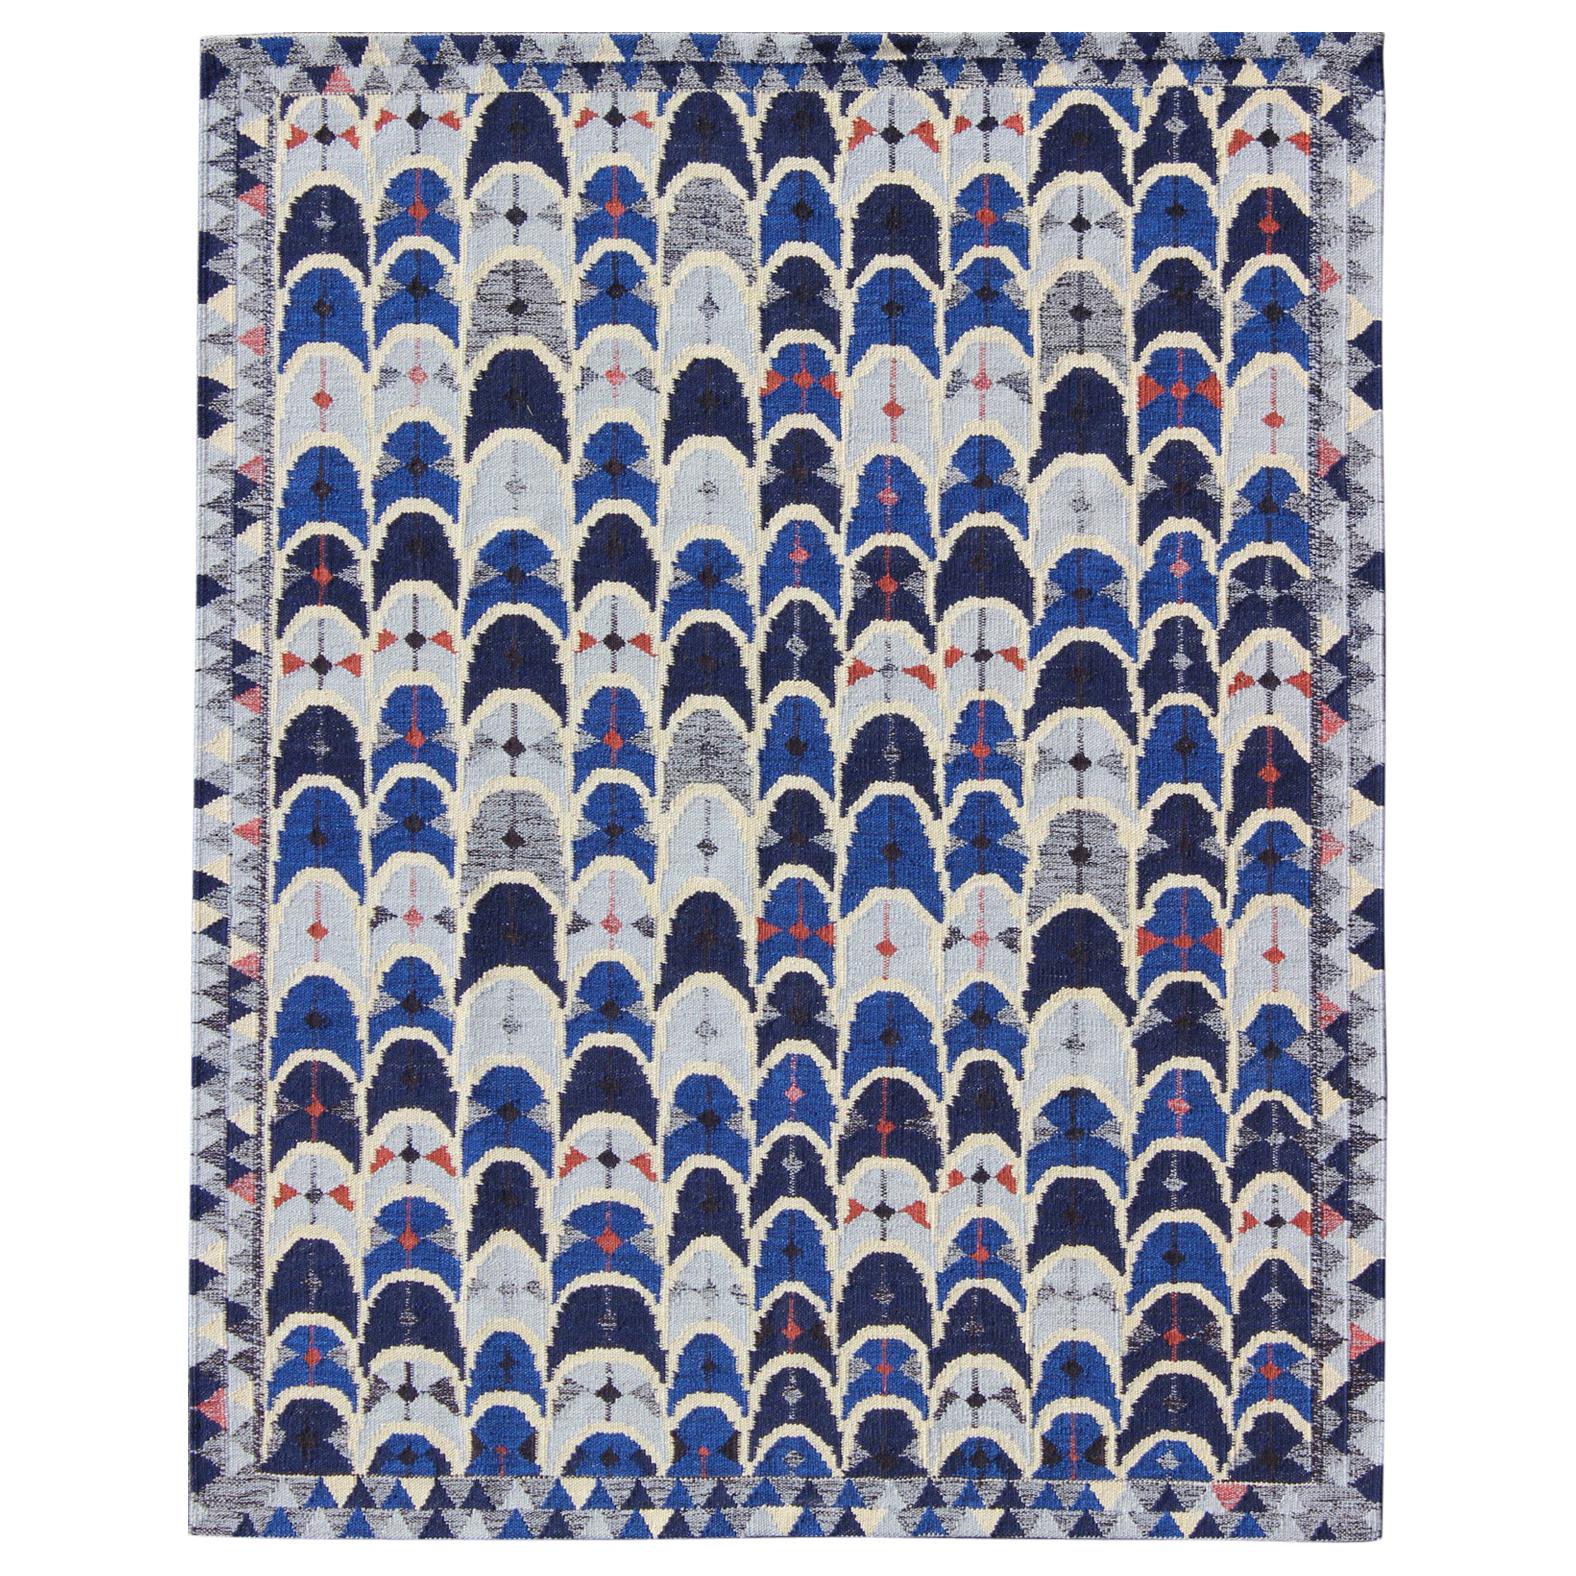 Contemporary Scandinavian Design Flat-Weave Rug in Blue, Charcoal, Red